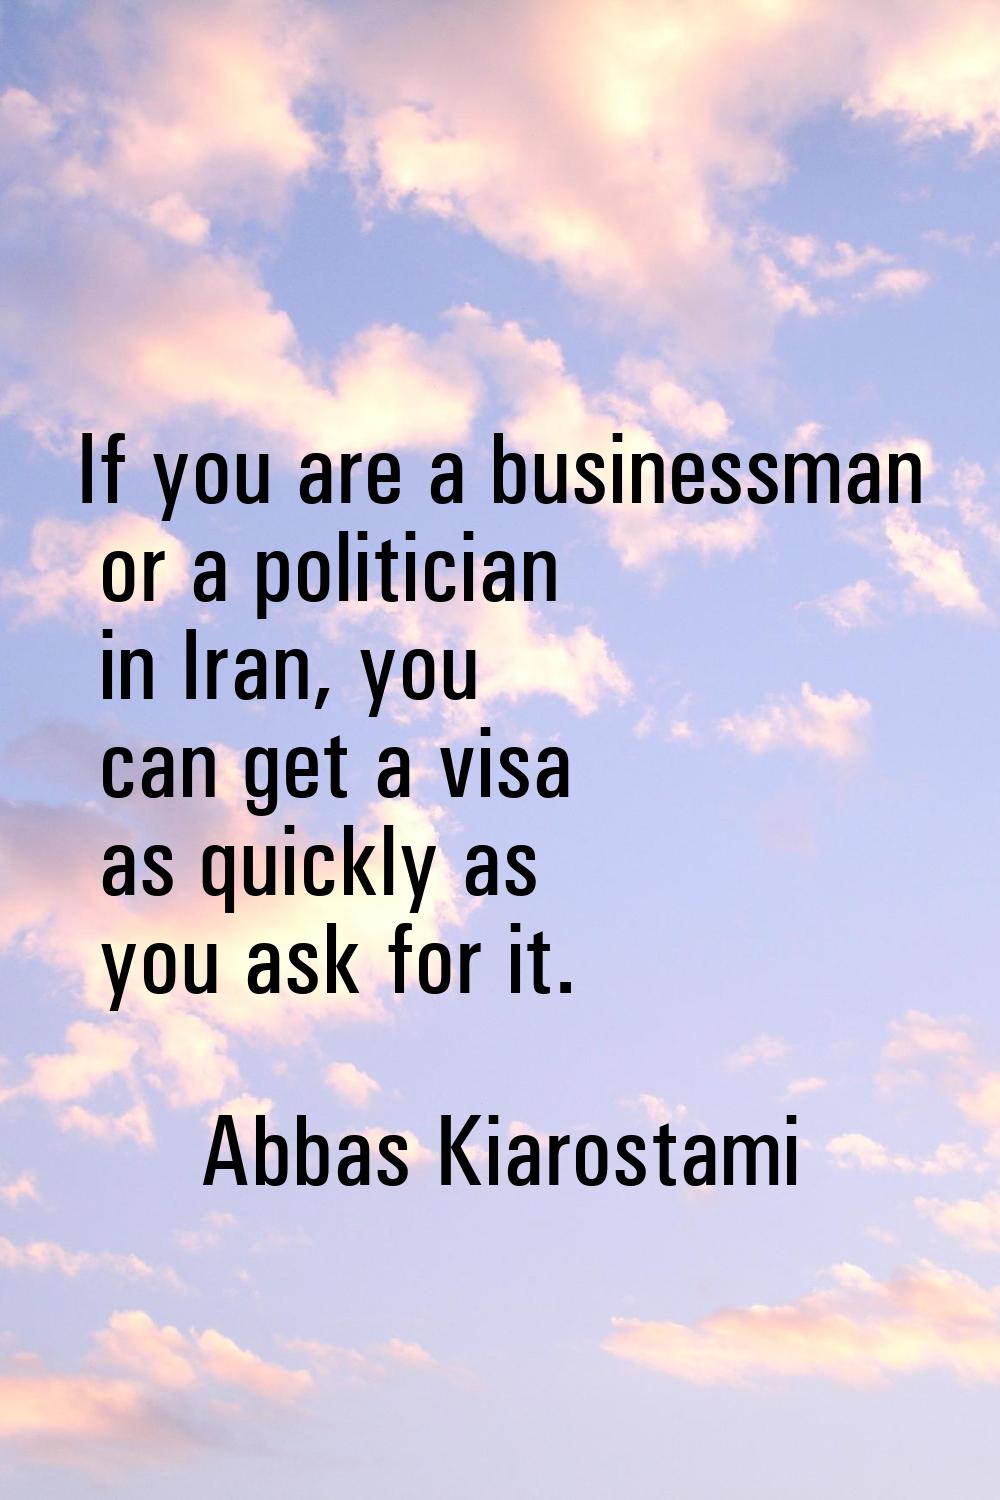 If you are a businessman or a politician in Iran, you can get a visa as quickly as you ask for it.